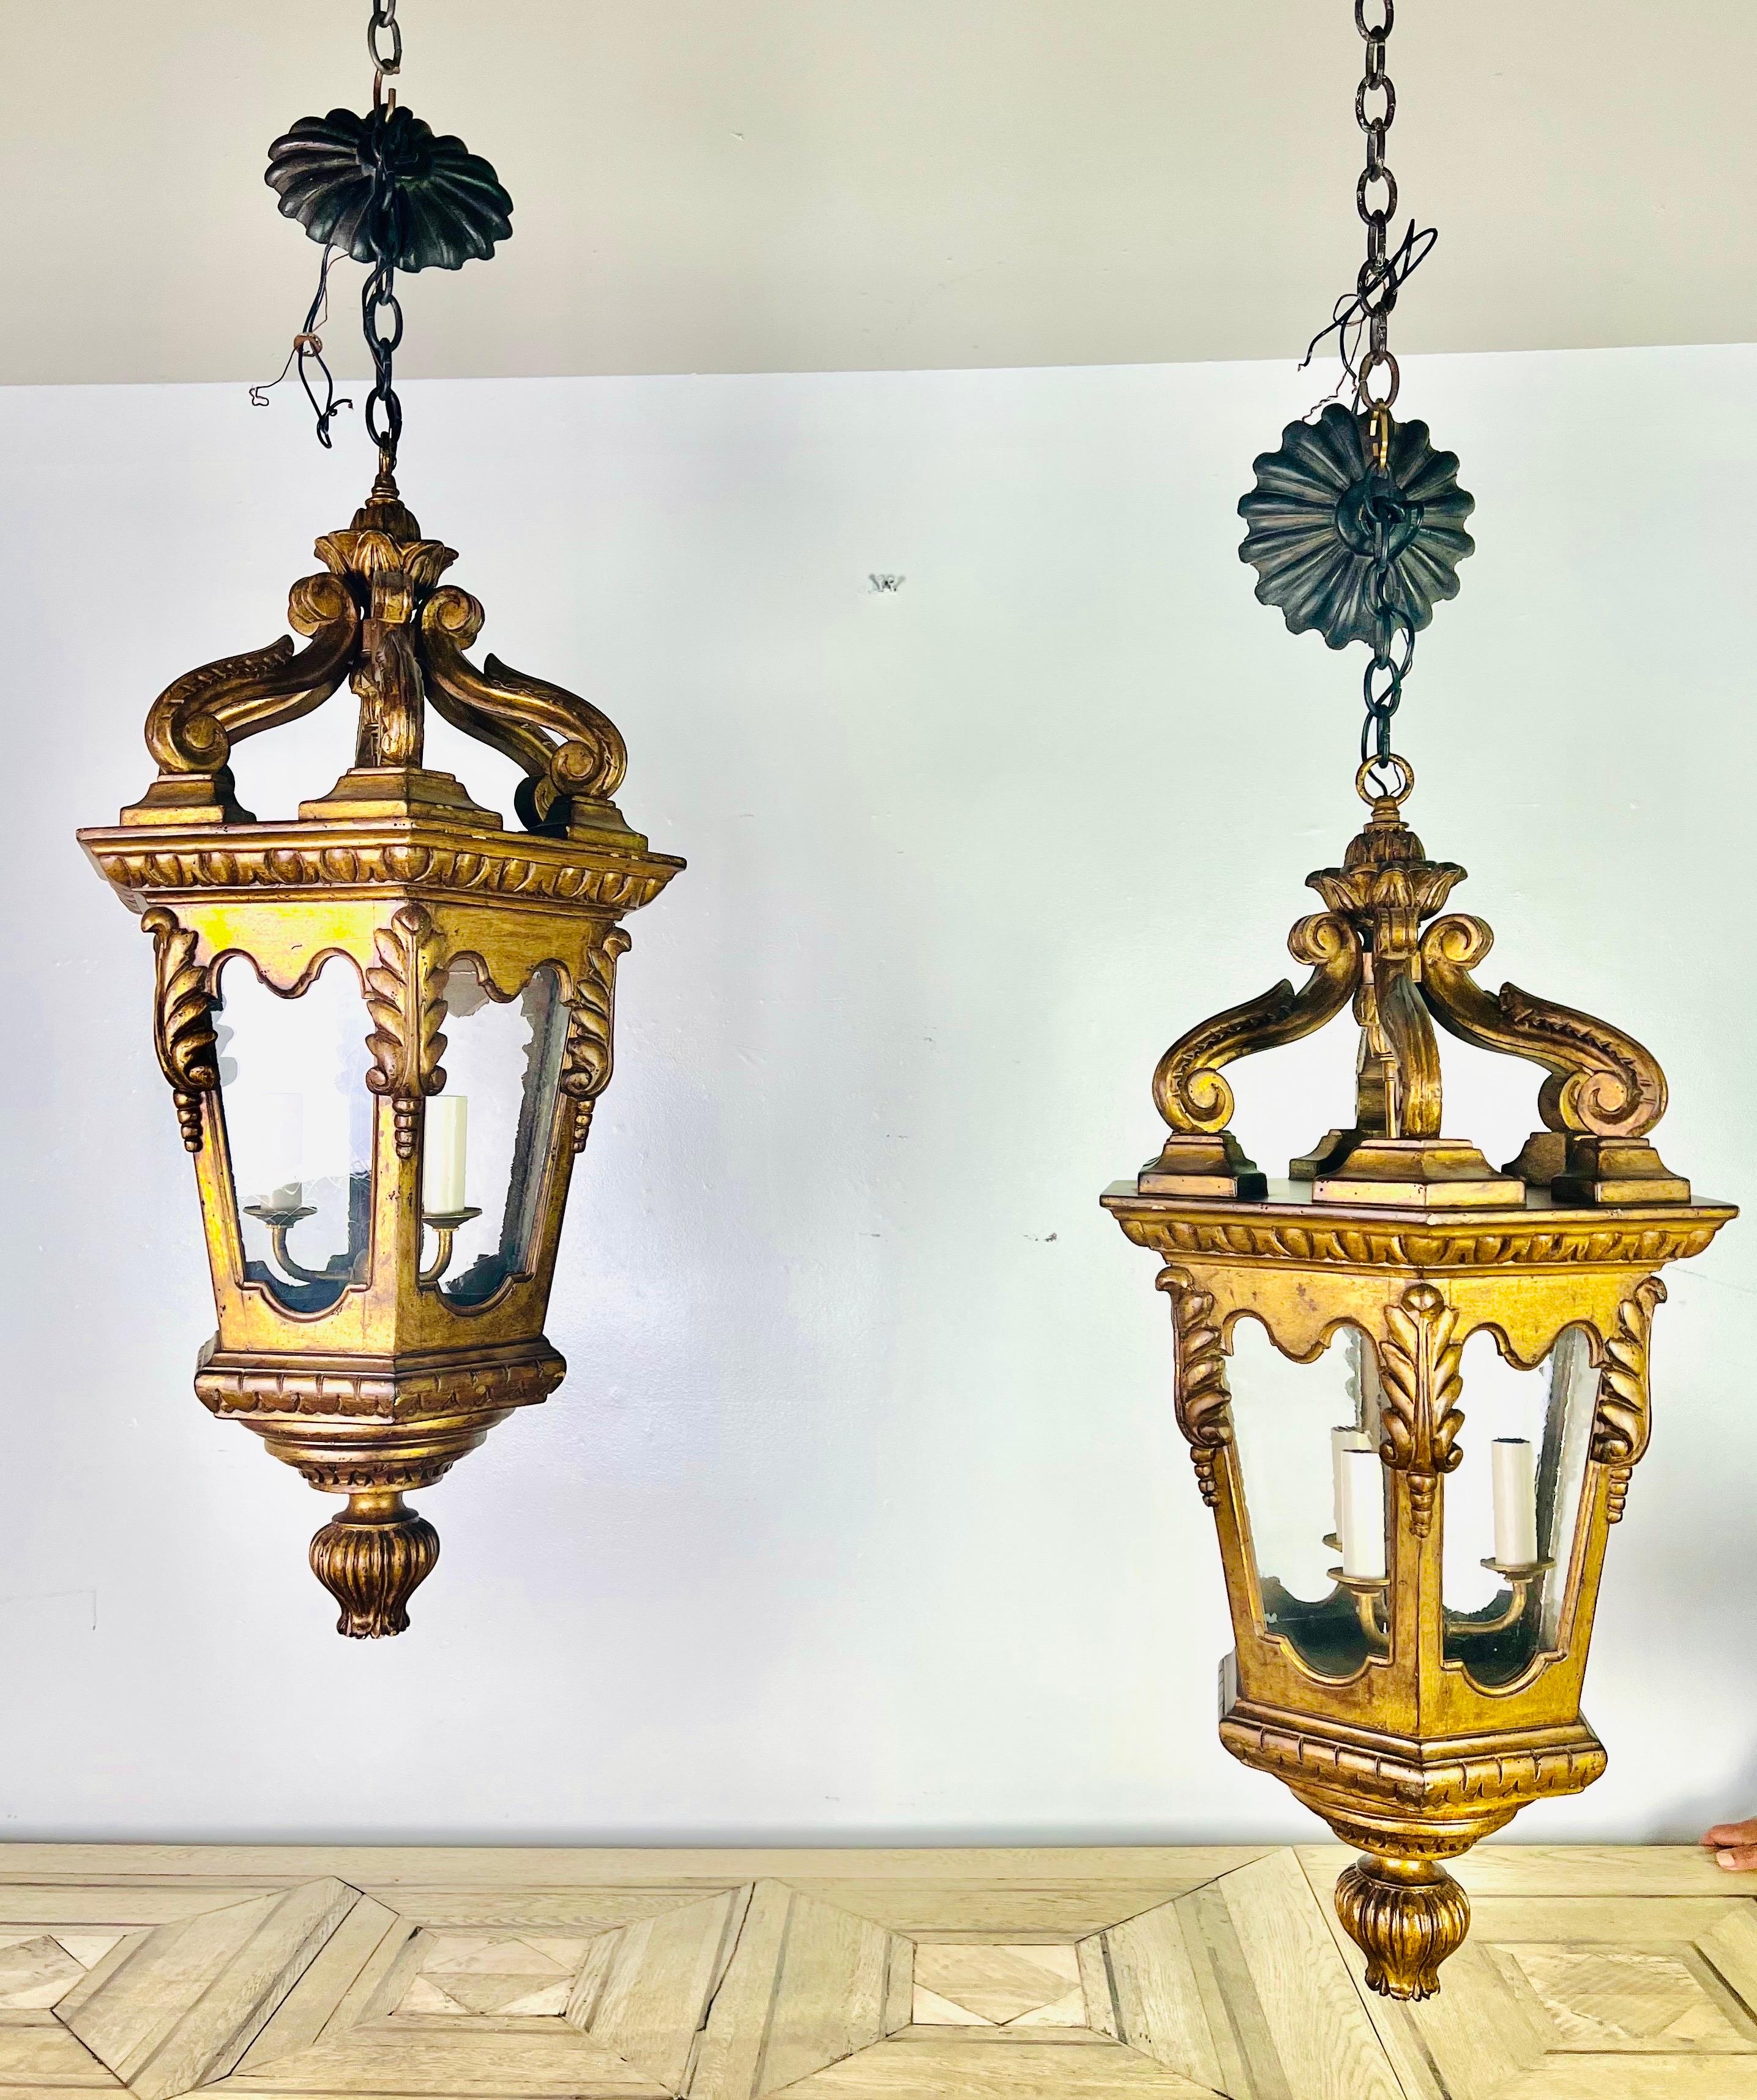 Pair of Italian gilt wood lanterns adorned with carved acanthus leaves and round fluted finials at the base. The glass is original. The 3-light lanterns include chain & canopy and are ready to install.